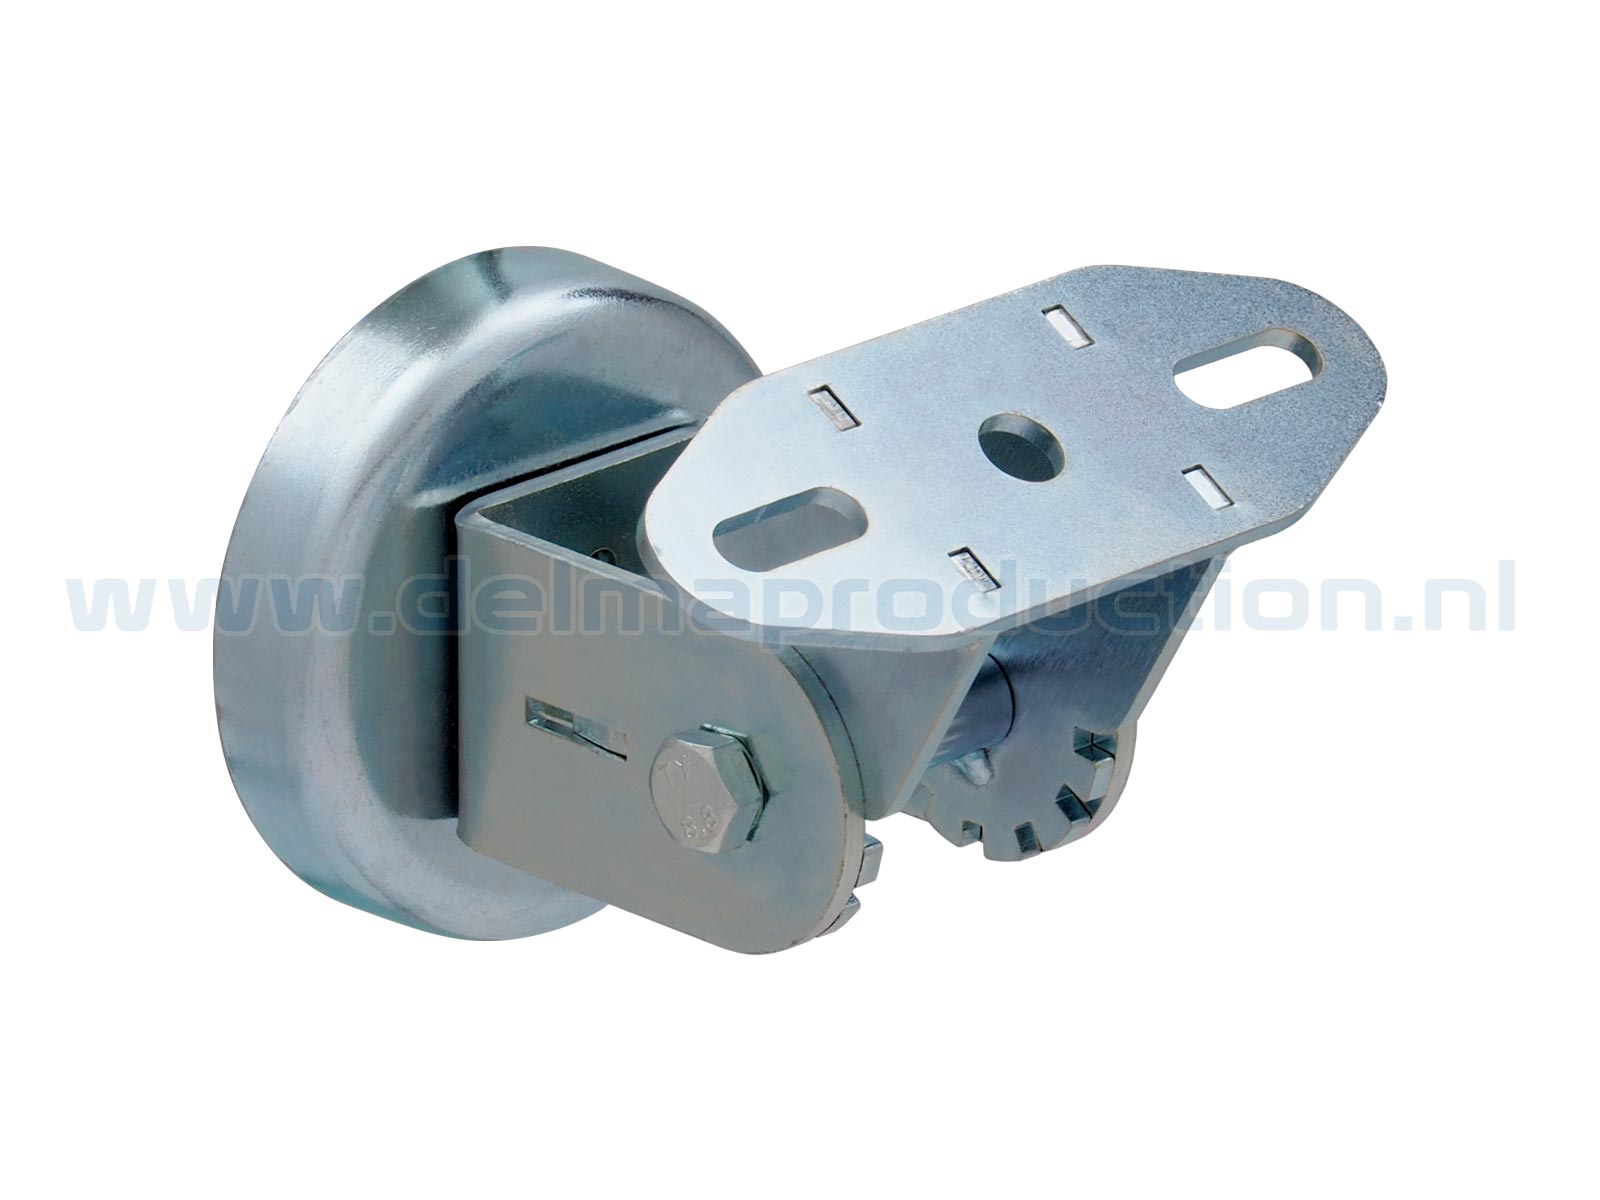 Quick adjustment universal mounting 59-86 mm with angle adjustment and M8 (2)